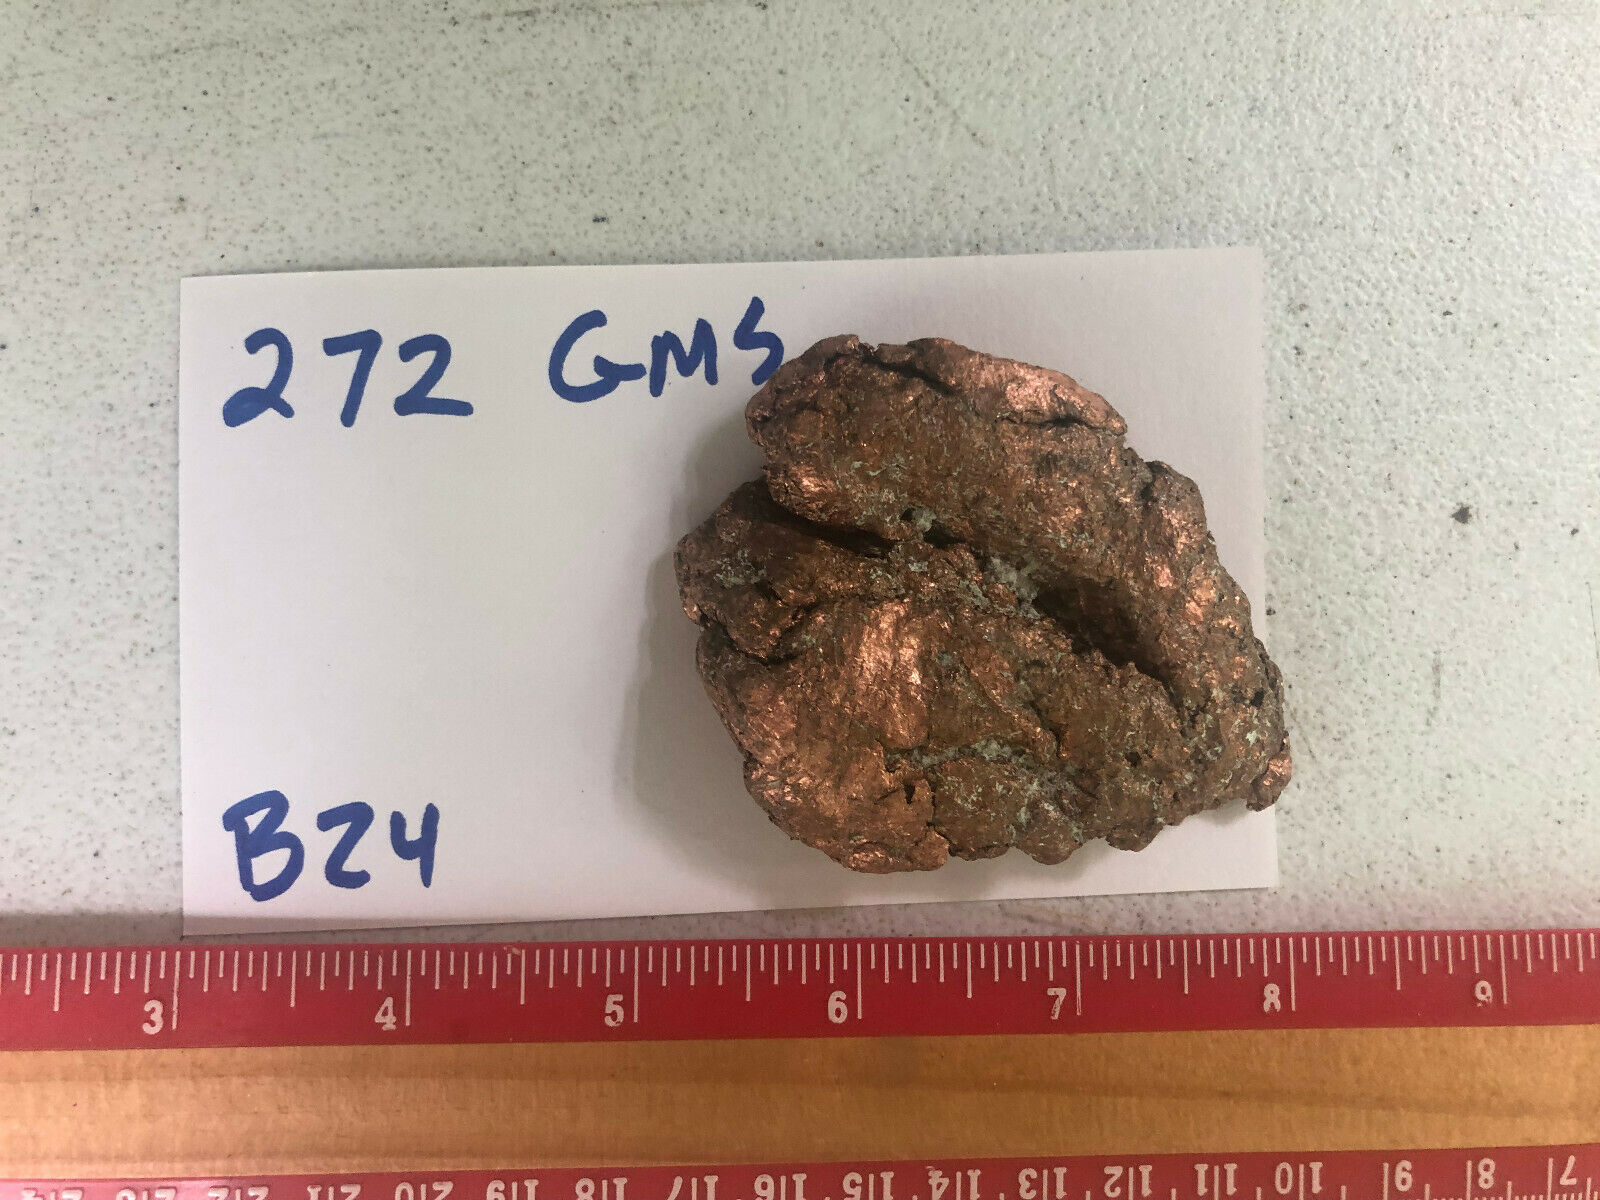 B24 Copper Nugget, Metal Detector Find, Ore, Crystal, Cleaned But 100% Natural